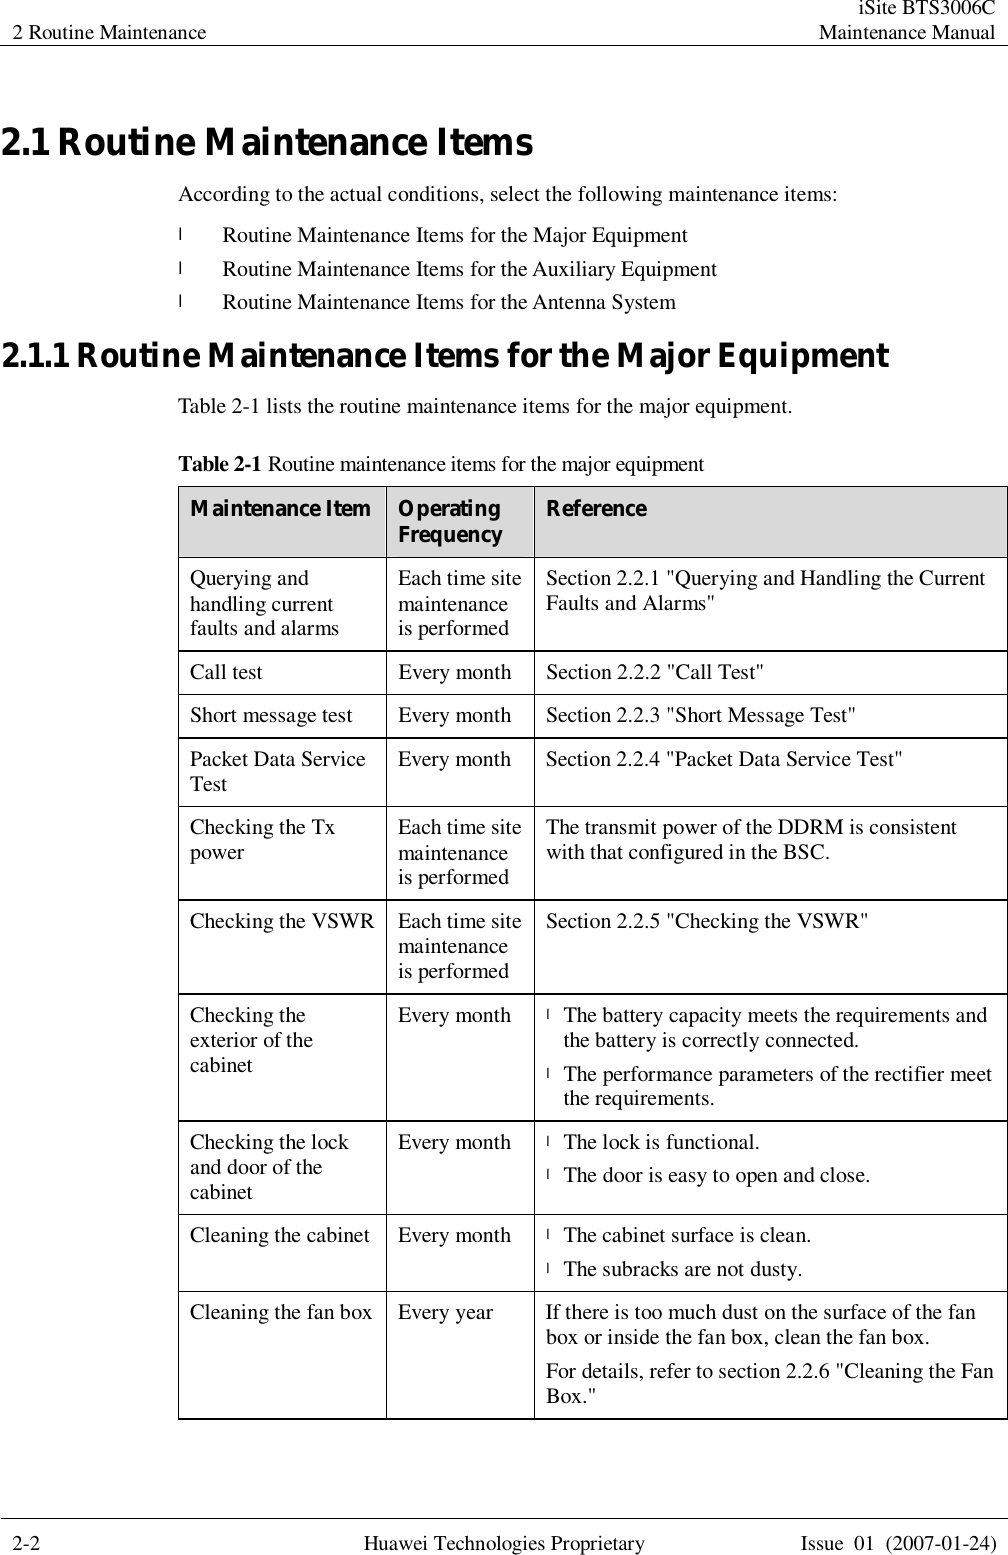 2 Routine Maintenance  iSite BTS3006C Maintenance Manual  2-2 Huawei Technologies Proprietary Issue 01 (2007-01-24)  2.1 Routine Maintenance Items According to the actual conditions, select the following maintenance items: l Routine Maintenance Items for the Major Equipment l Routine Maintenance Items for the Auxiliary Equipment l Routine Maintenance Items for the Antenna System 2.1.1 Routine Maintenance Items for the Major Equipment Table 2-1 lists the routine maintenance items for the major equipment. Table 2-1 Routine maintenance items for the major equipment Maintenance Item Operating Frequency  Reference Querying and handling current faults and alarms Each time site maintenance is performed Section 2.2.1 &quot;Querying and Handling the Current Faults and Alarms&quot; Call test Every month Section 2.2.2 &quot;Call Test&quot; Short message test Every month Section 2.2.3 &quot;Short Message Test&quot; Packet Data Service Test  Every month Section 2.2.4 &quot;Packet Data Service Test&quot; Checking the Tx power  Each time site maintenance is performed The transmit power of the DDRM is consistent with that configured in the BSC. Checking the VSWR Each time site maintenance is performed Section 2.2.5 &quot;Checking the VSWR&quot; Checking the exterior of the cabinet Every month  l The battery capacity meets the requirements and the battery is correctly connected. l The performance parameters of the rectifier meet the requirements. Checking the lock and door of the cabinet Every month l The lock is functional. l The door is easy to open and close. Cleaning the cabinet Every month  l The cabinet surface is clean. l The subracks are not dusty. Cleaning the fan box  Every year If there is too much dust on the surface of the fan box or inside the fan box, clean the fan box.  For details, refer to section 2.2.6 &quot;Cleaning the Fan Box.&quot; 